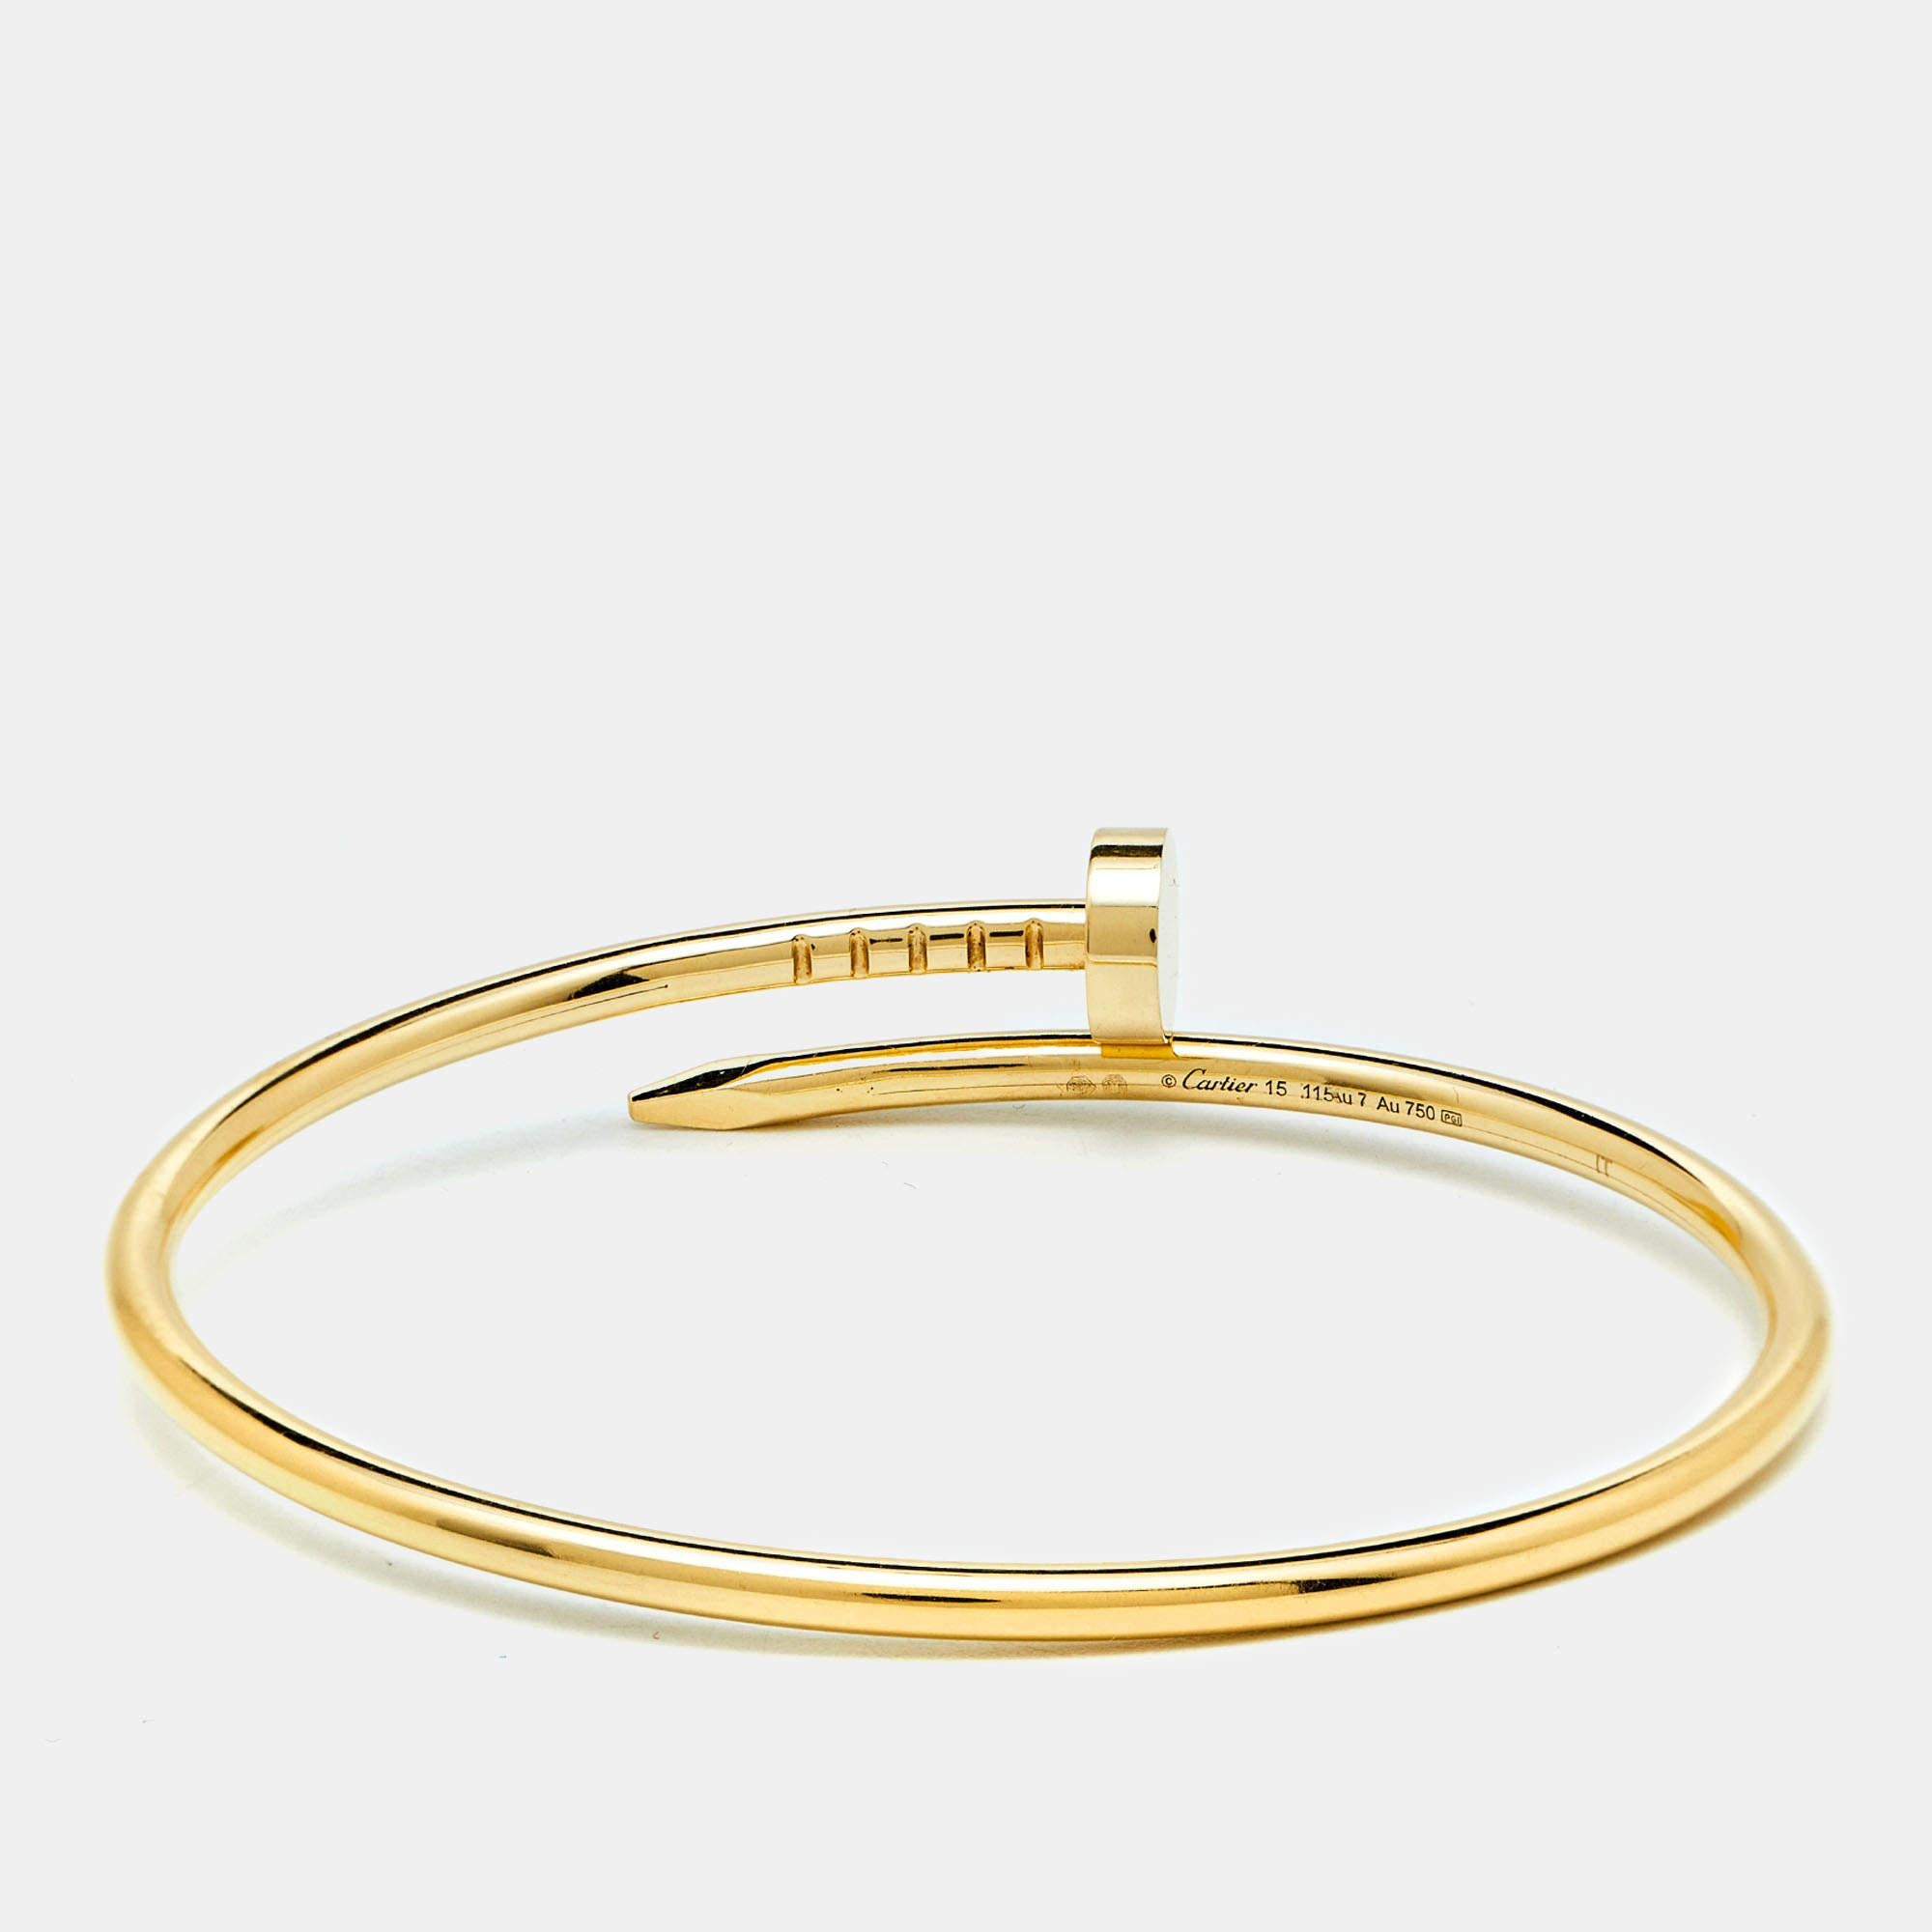 The Cartier Juste Un Clou bracelet is an iconic jewelry piece featuring a nail-inspired design. Crafted from luxurious 18k yellow gold, the bracelet seamlessly combines boldness and elegance, making it a timeless and distinctive accessory that adds